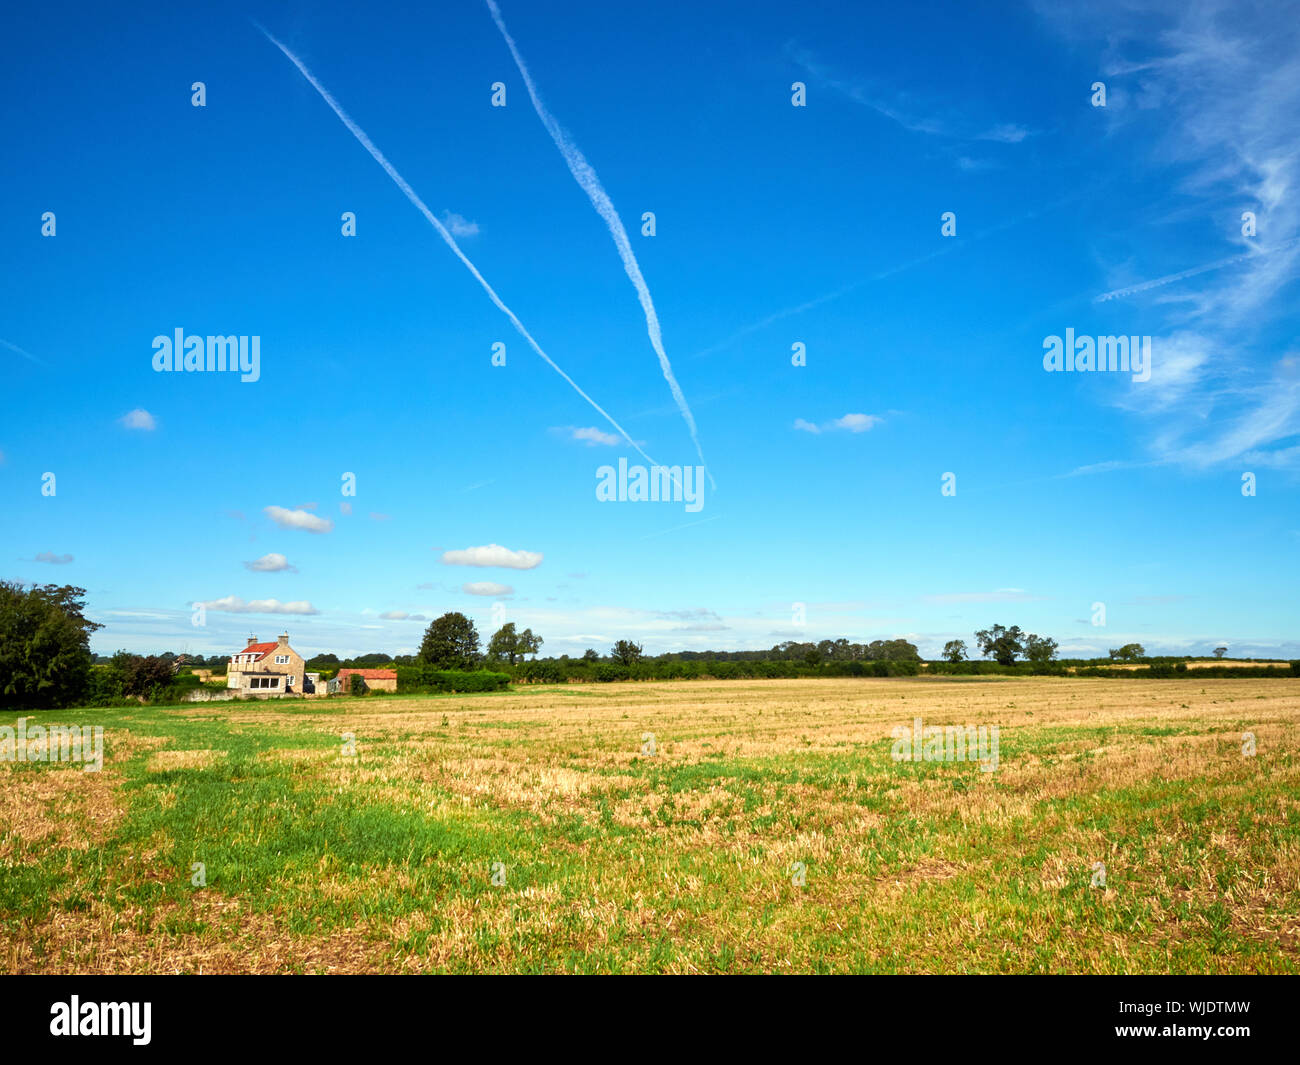 Aeroplane contrails in a blue sky over a stubble field with a stone house in the distance Stock Photo